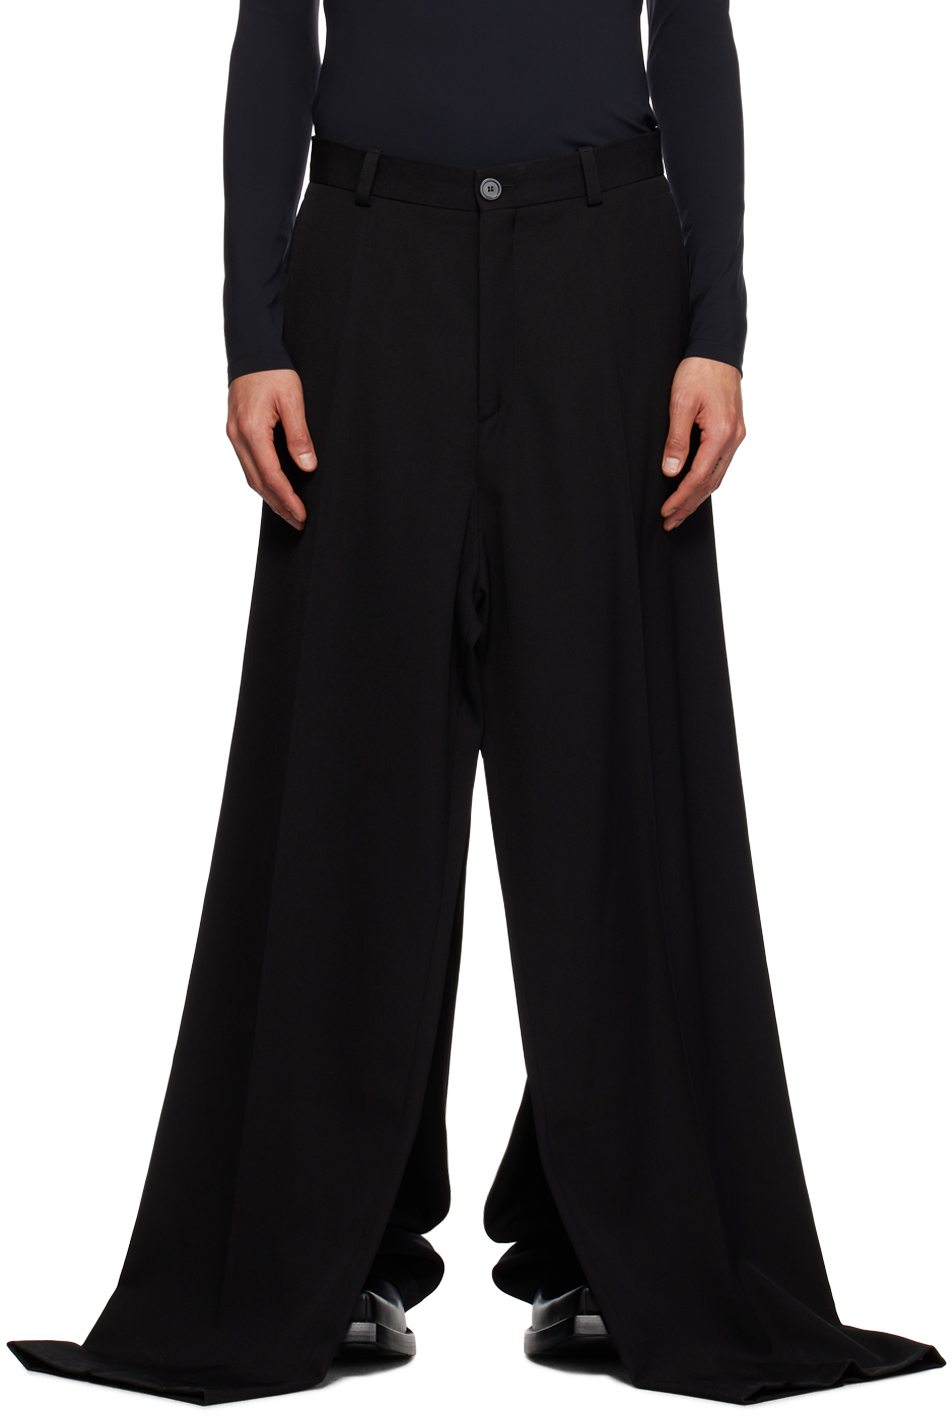 Balenciaga Double Front Black Wool Trousers